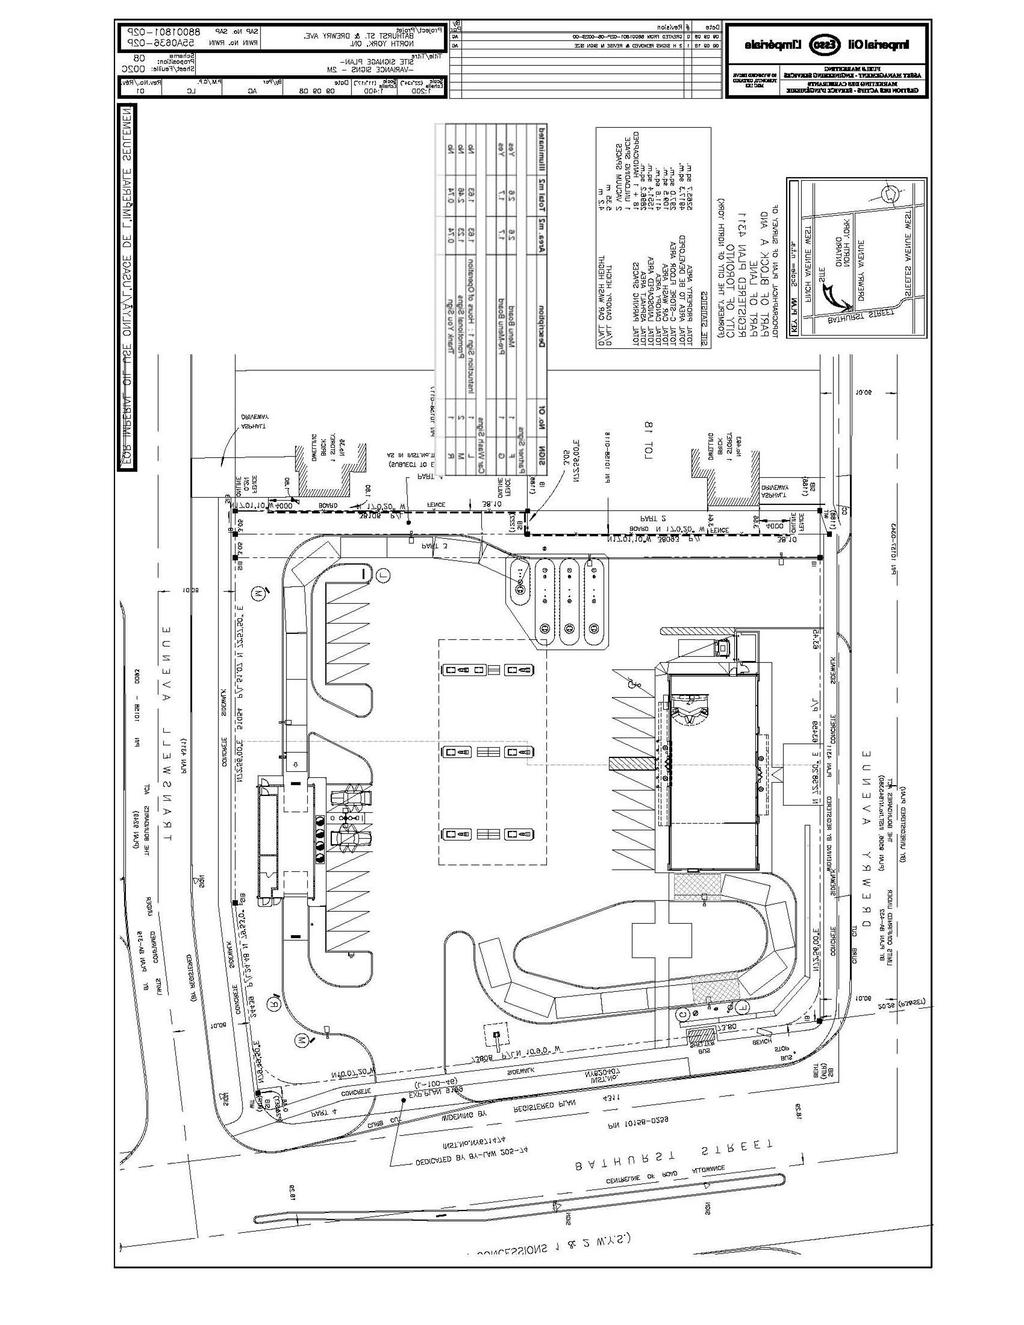 Attachment 2A Site Plan/Location of Signs for